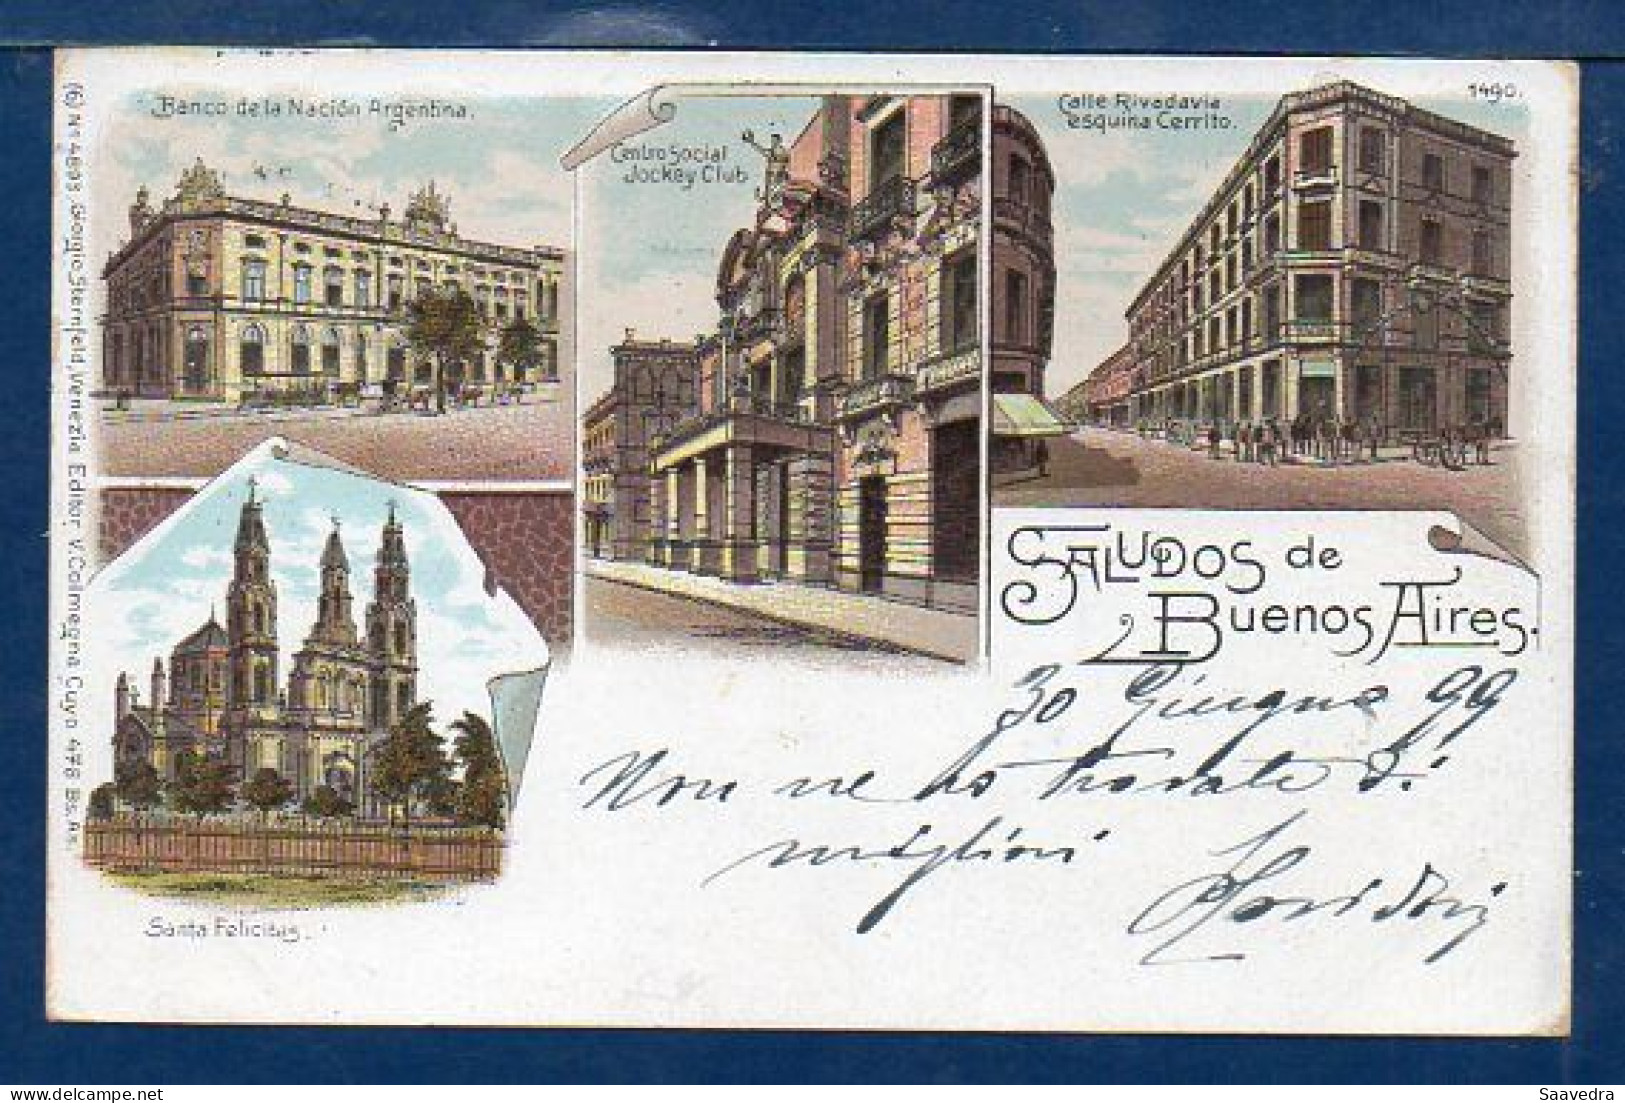 Argentina To Italy, "Gruss From Buenos Aires", 1899, Used Litho Postcard  (037) - Argentinien